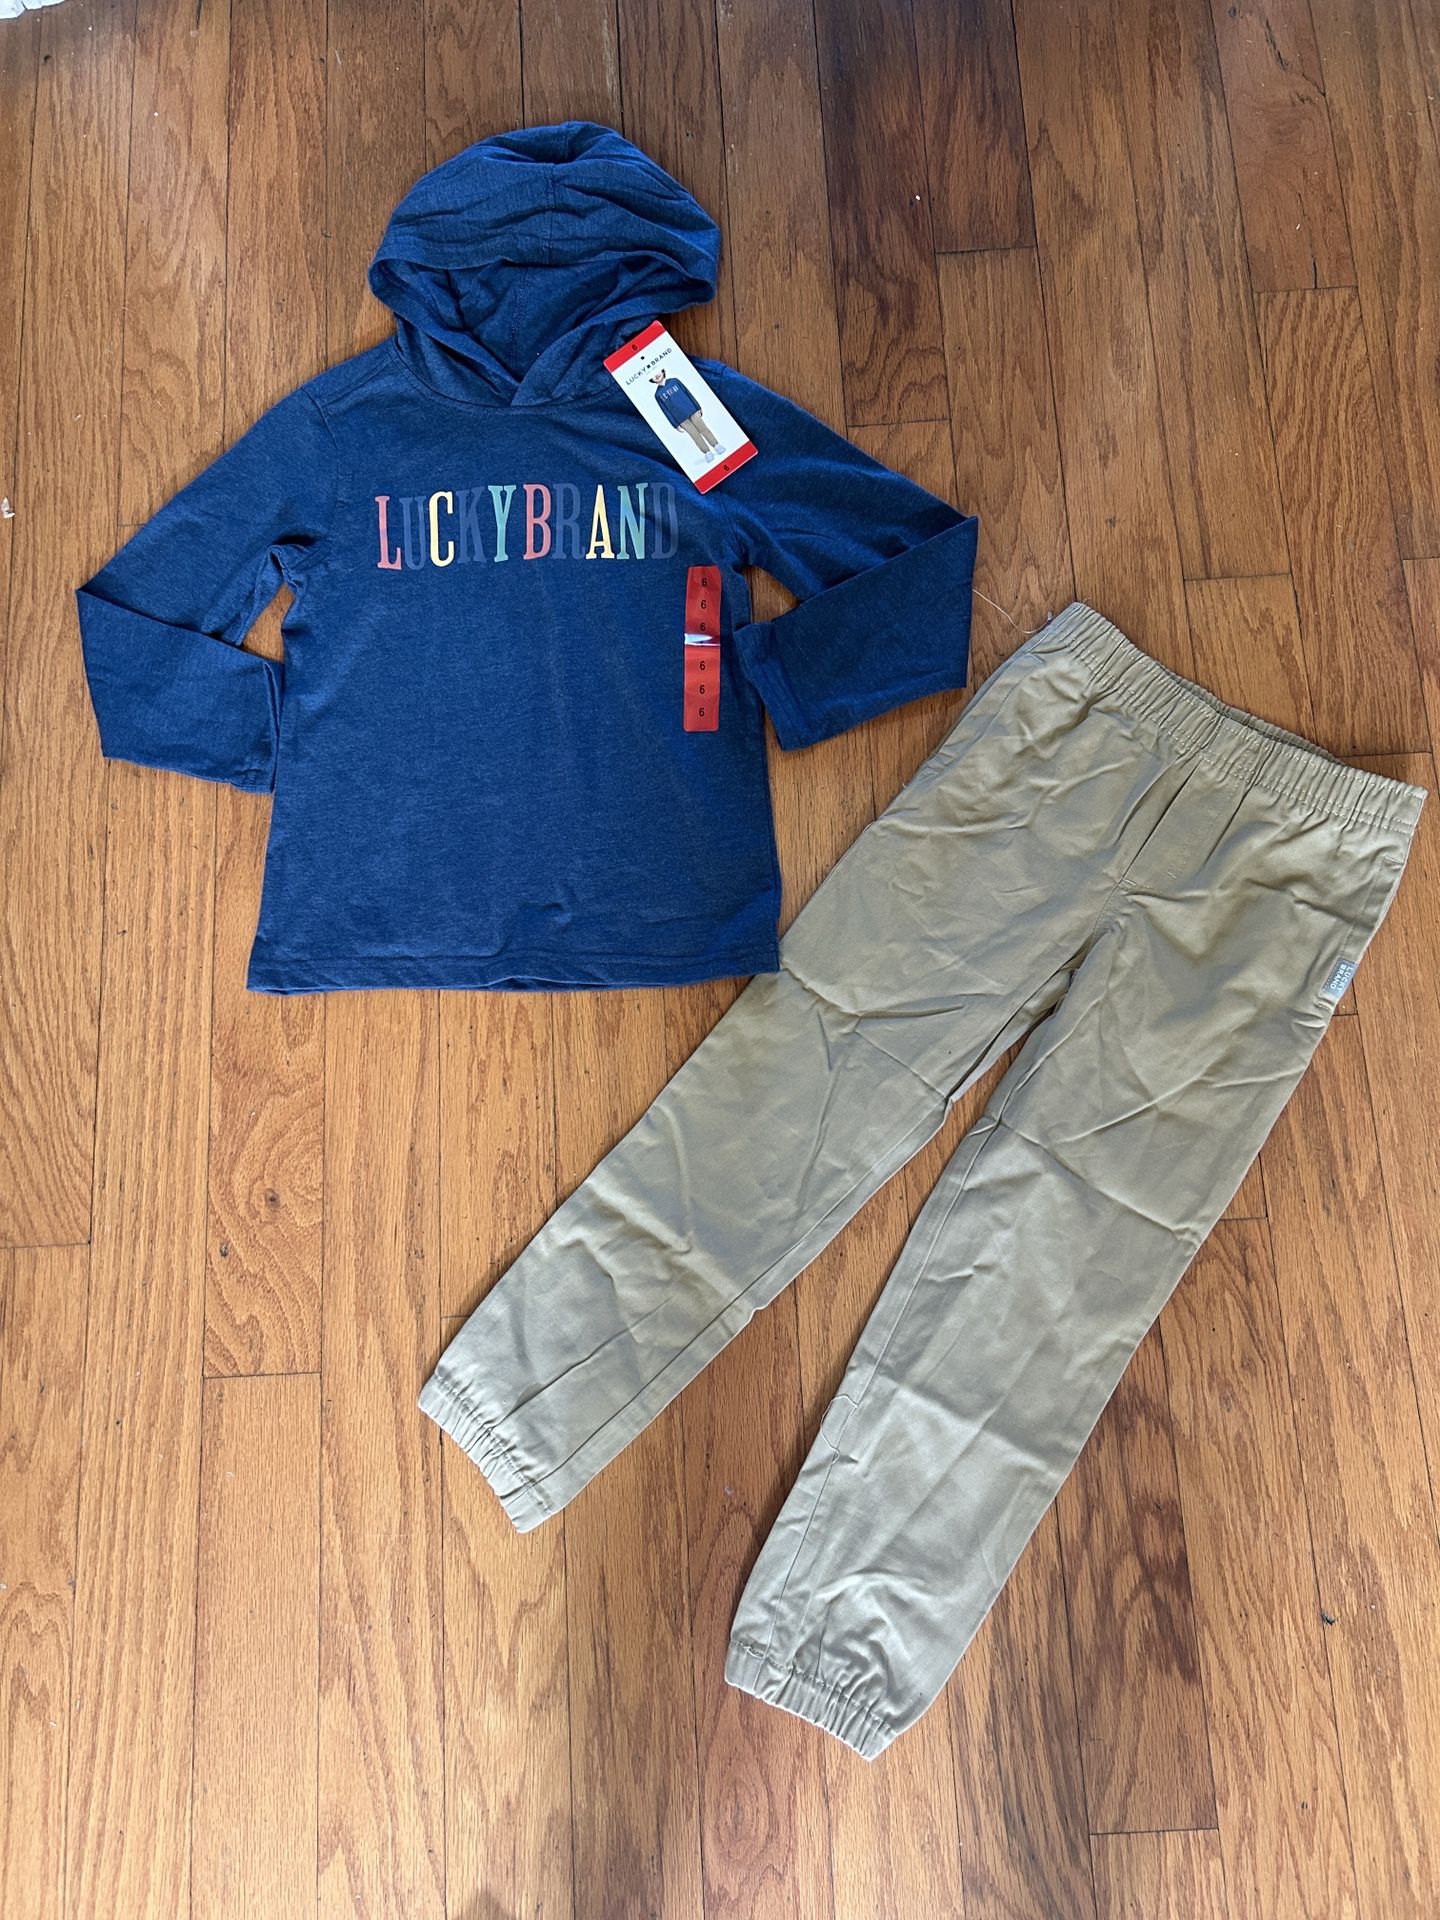 NWT Lucky Brand boys 2pcs outfit set size 6